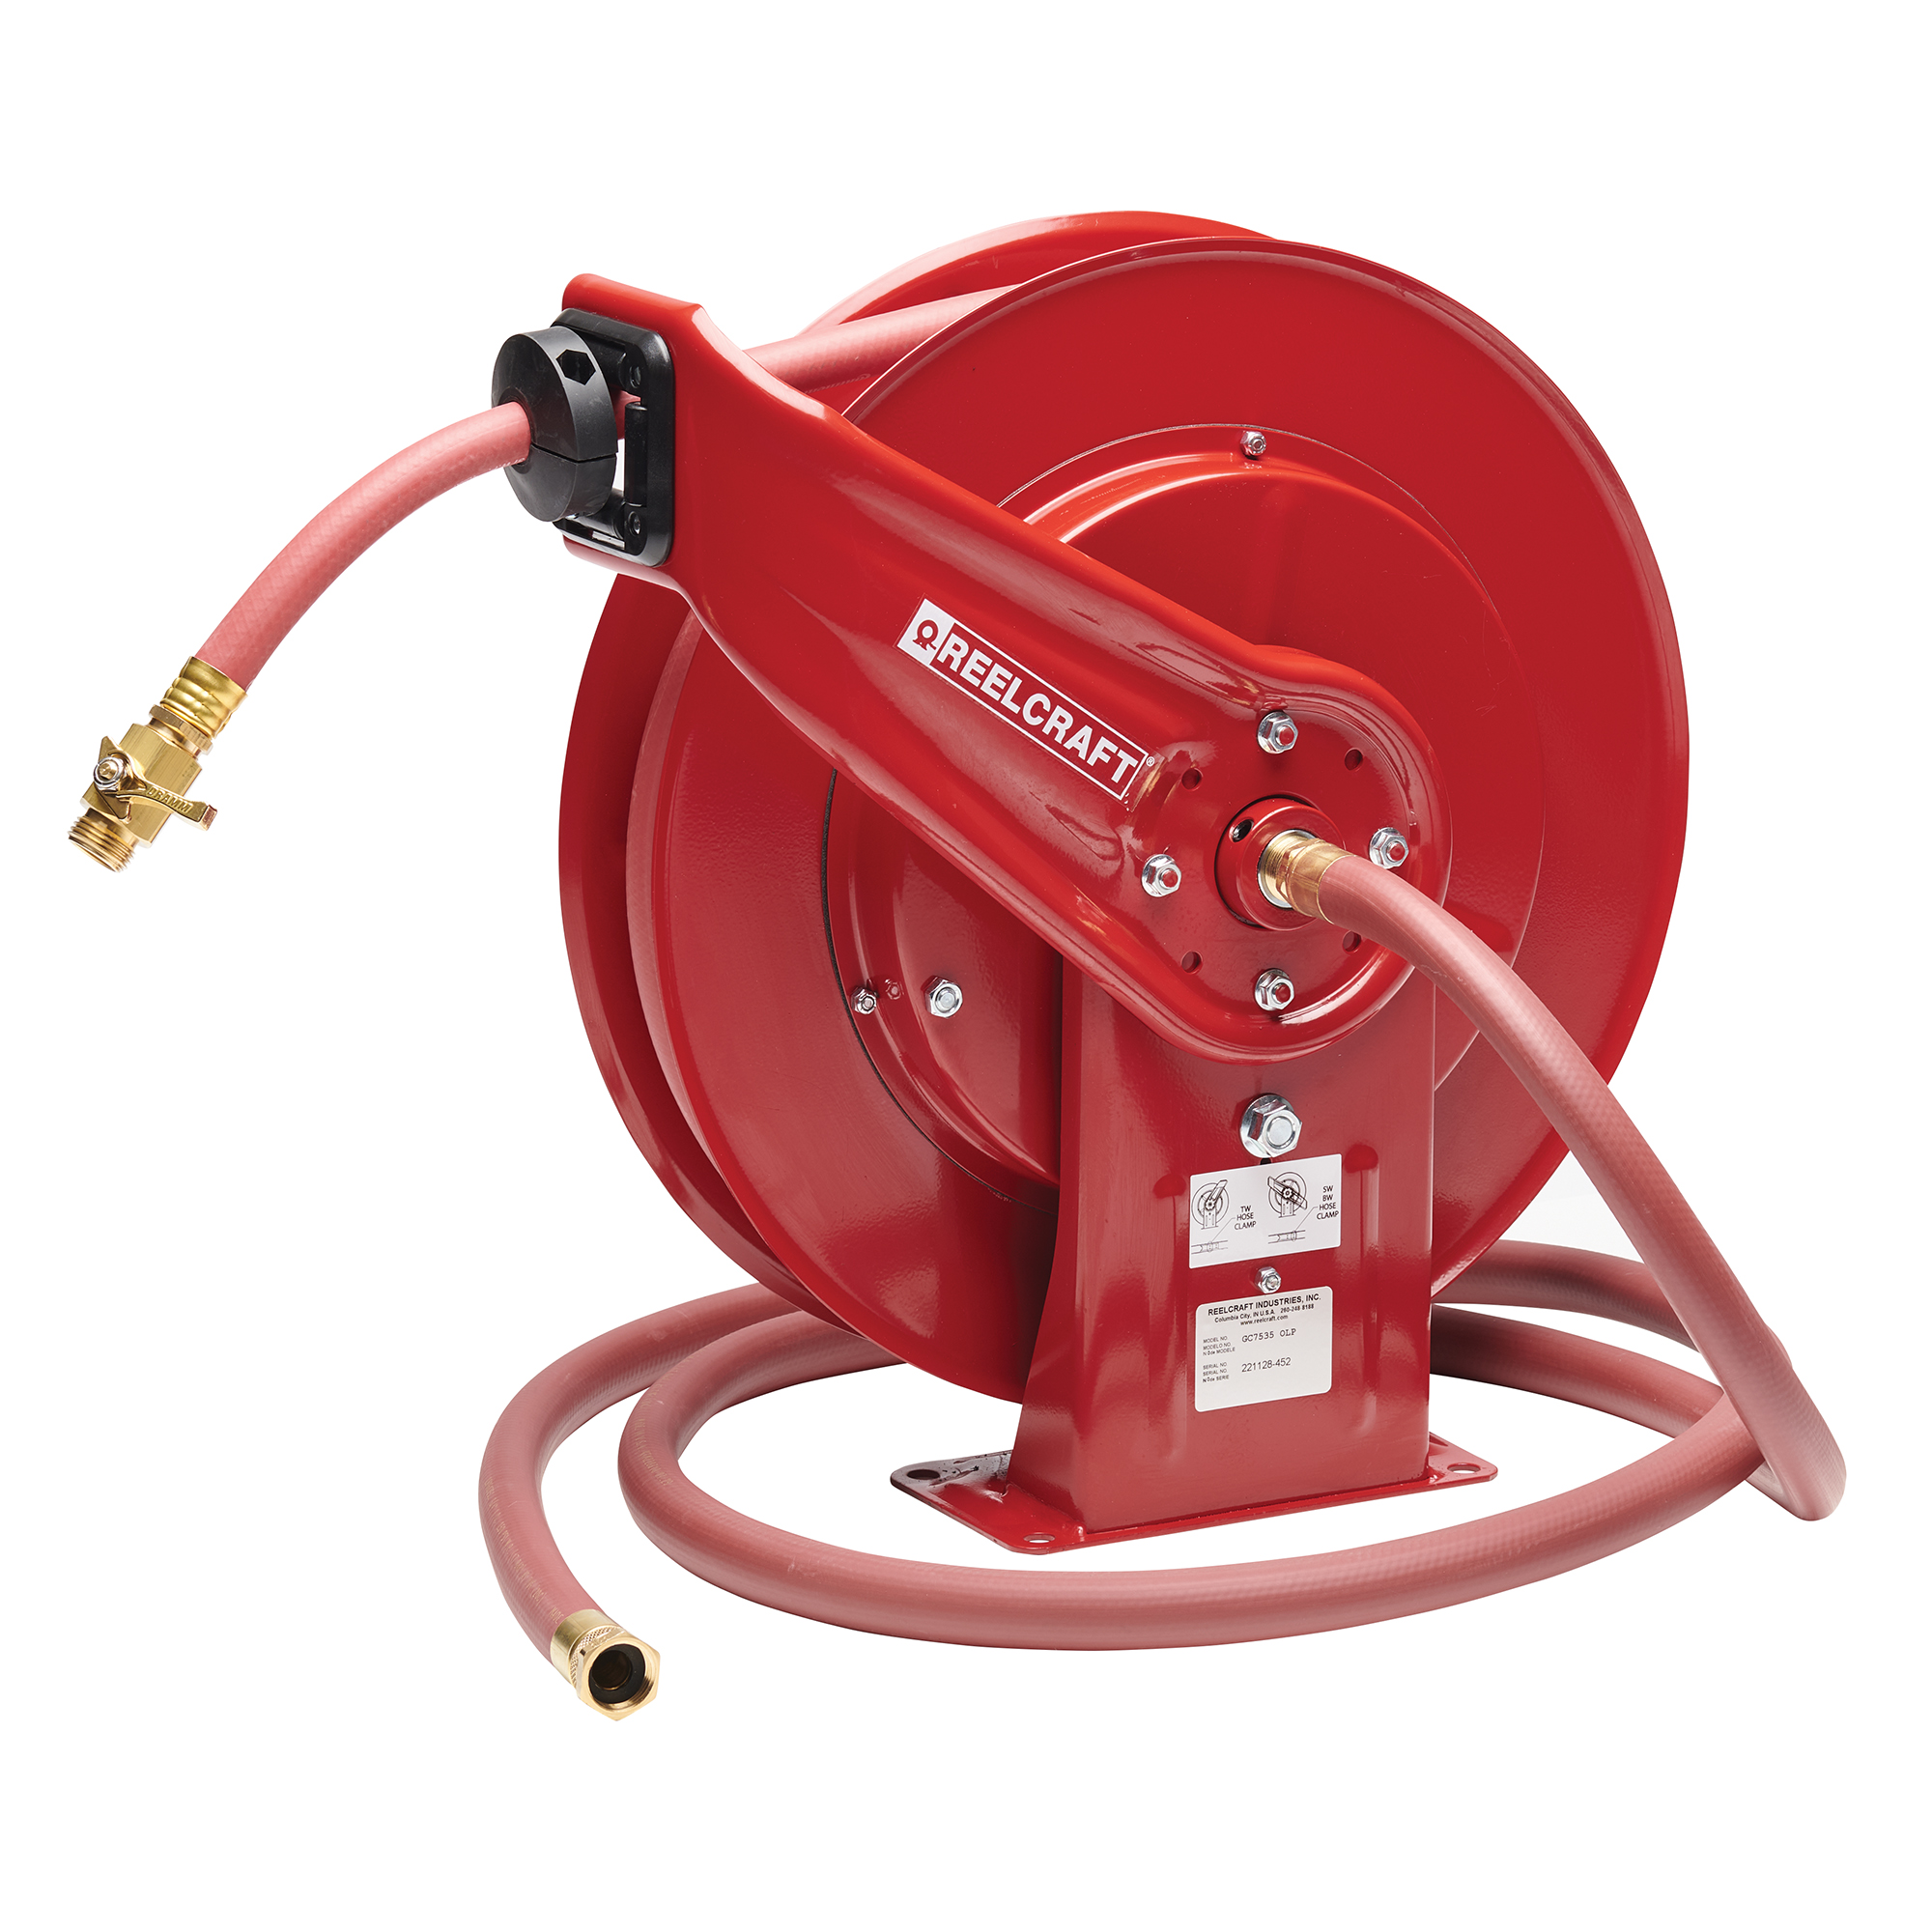 Utility grease hose reel for Gardens & Irrigation 